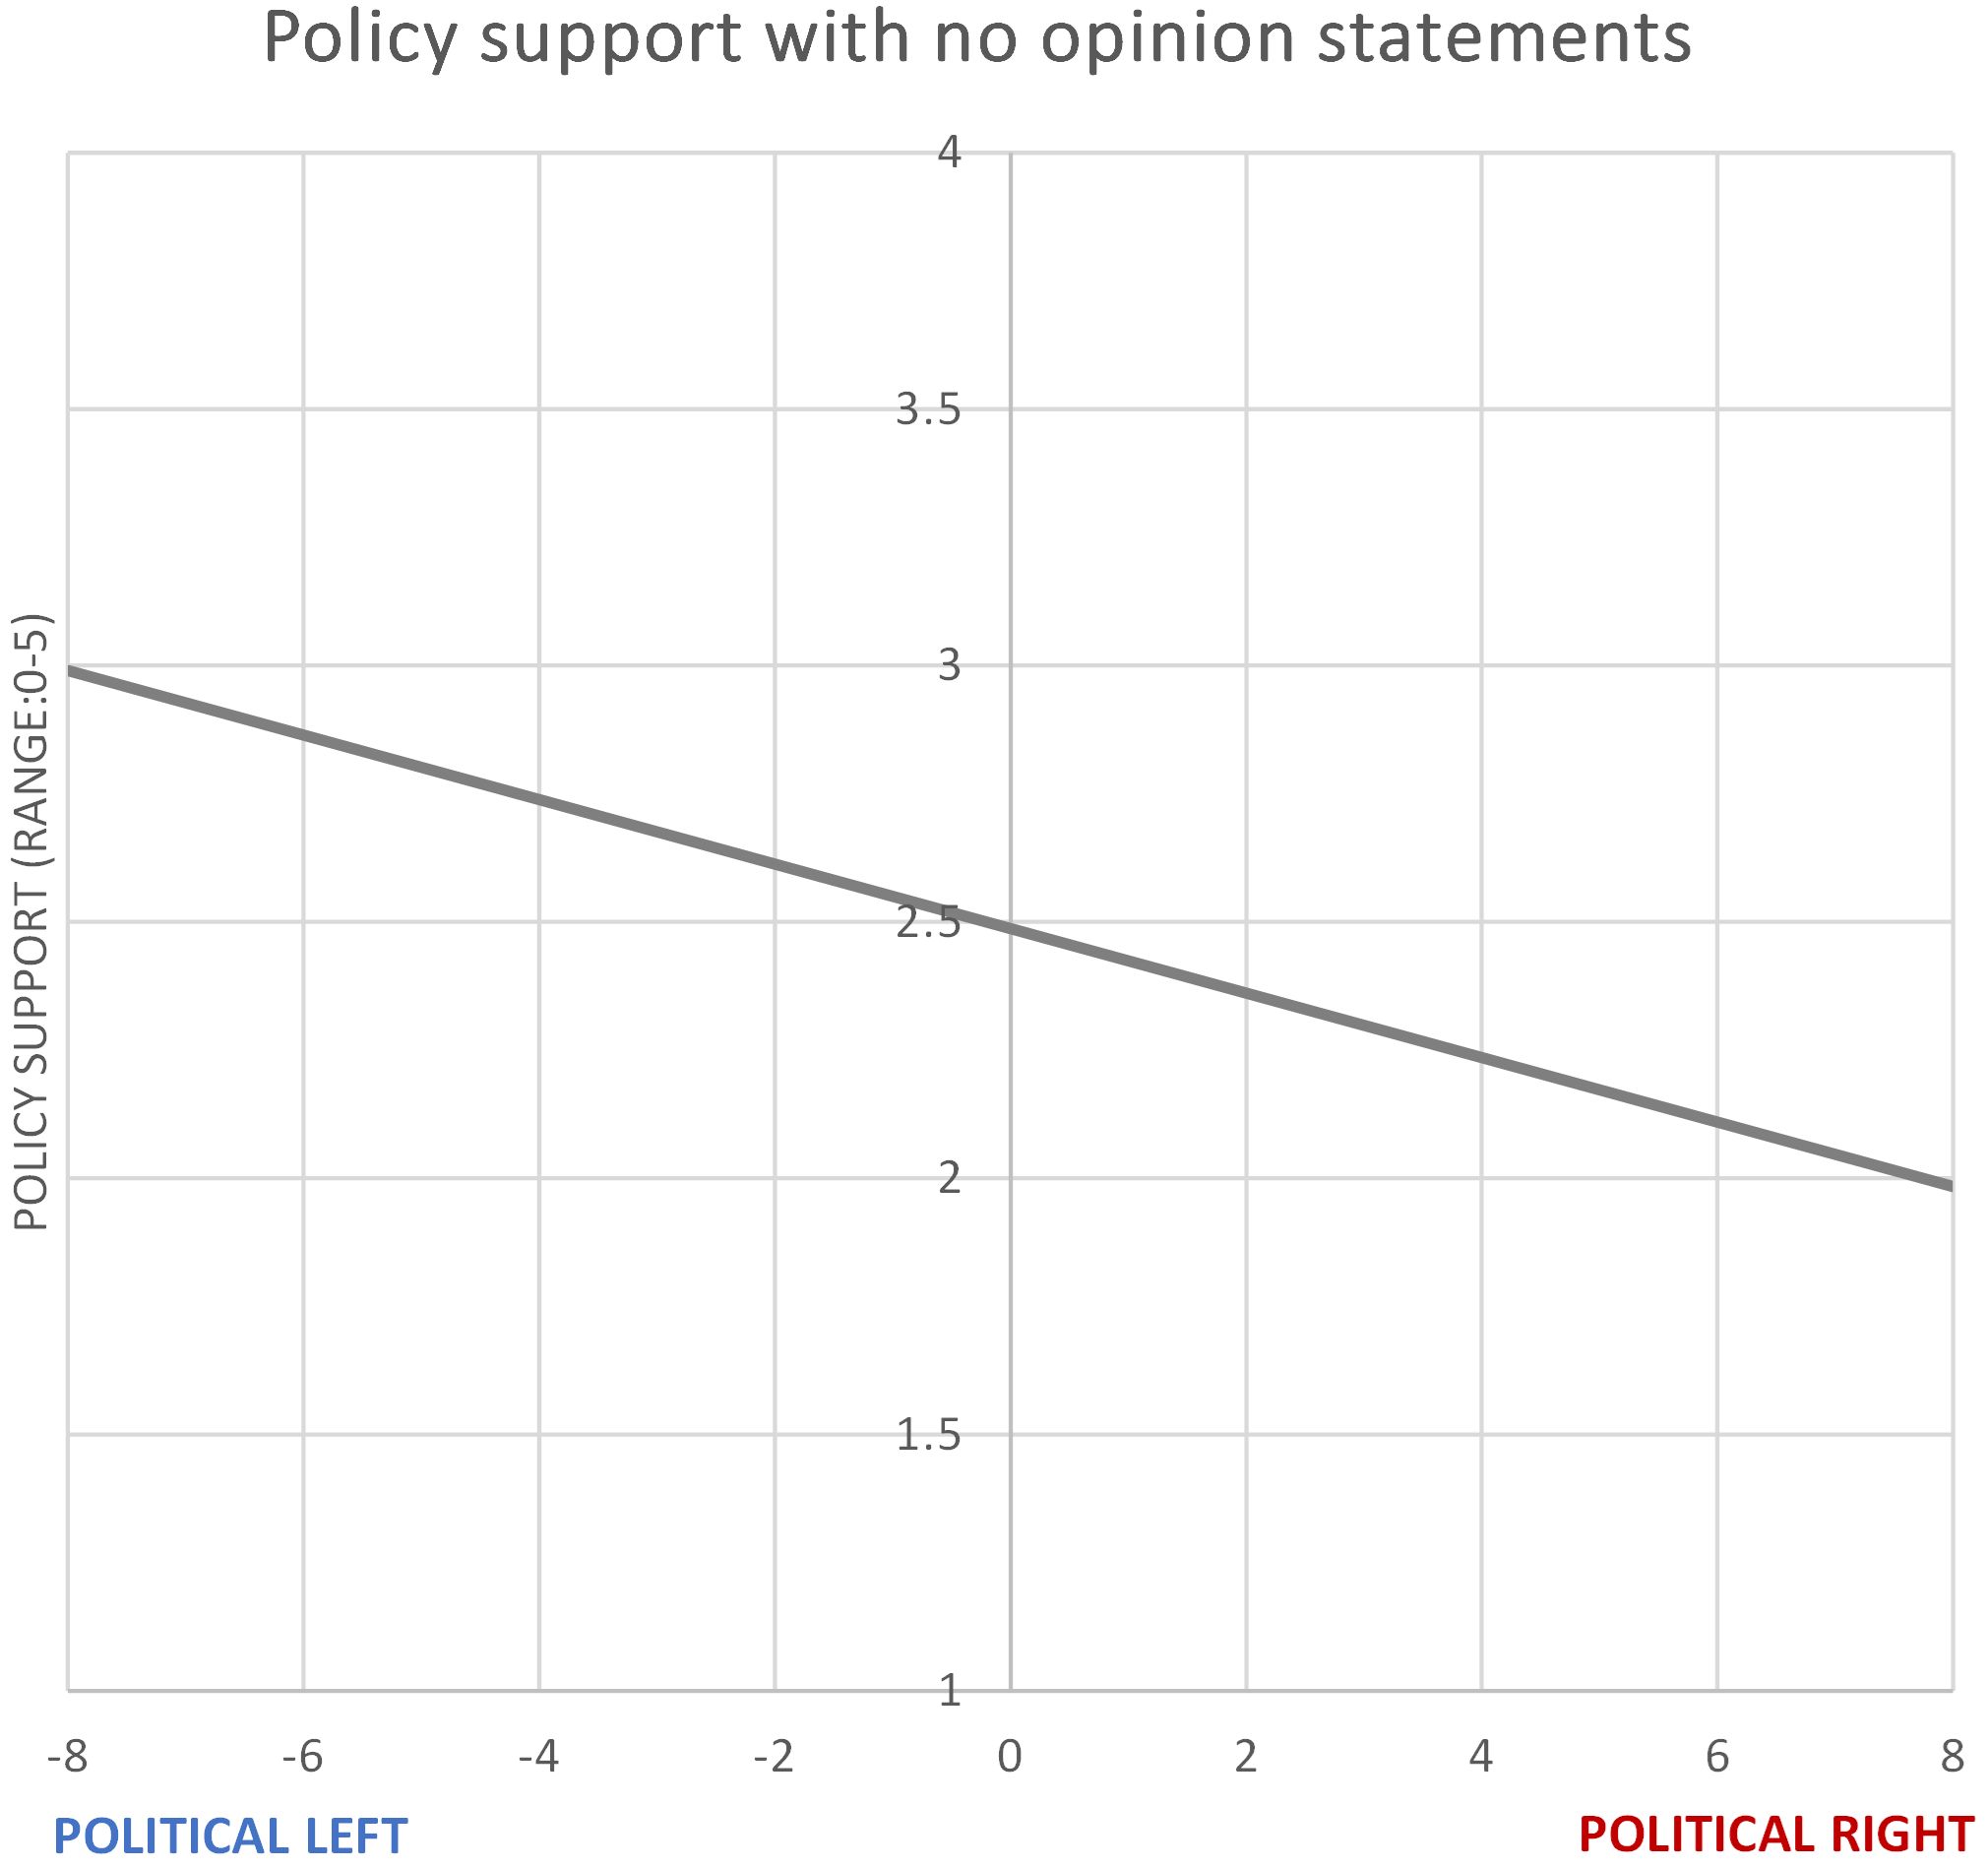 Policy support levels across the political spectrum before introduction of opinion statements.